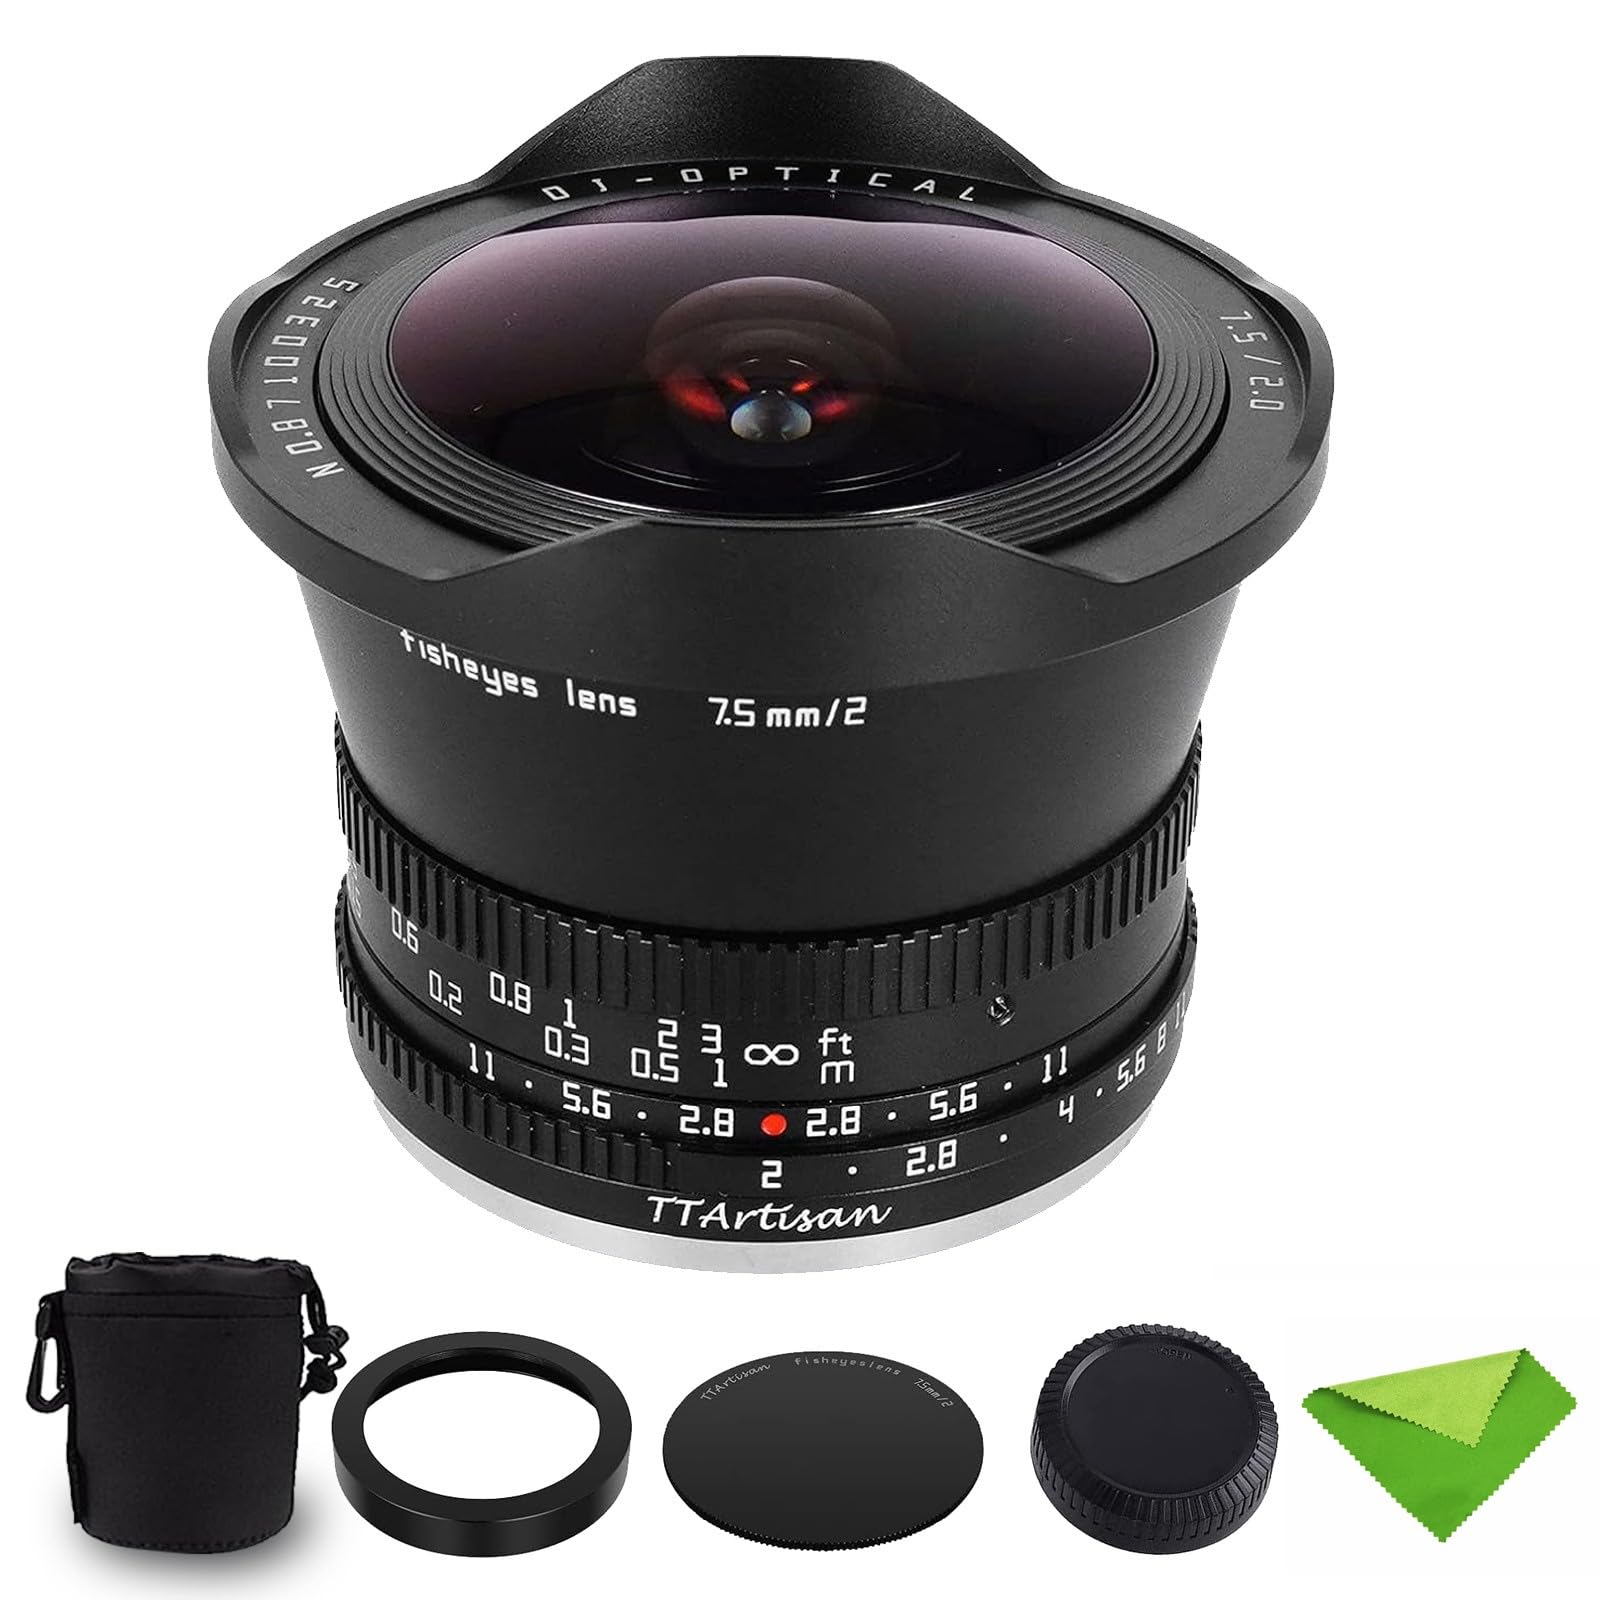 TTARTISAN 7.5mm F2.0 APS-C Large Aperture with 180 Angle of View Fisheye Lens for Leica L-Mount Cameras T TL TL2 CL for Sig